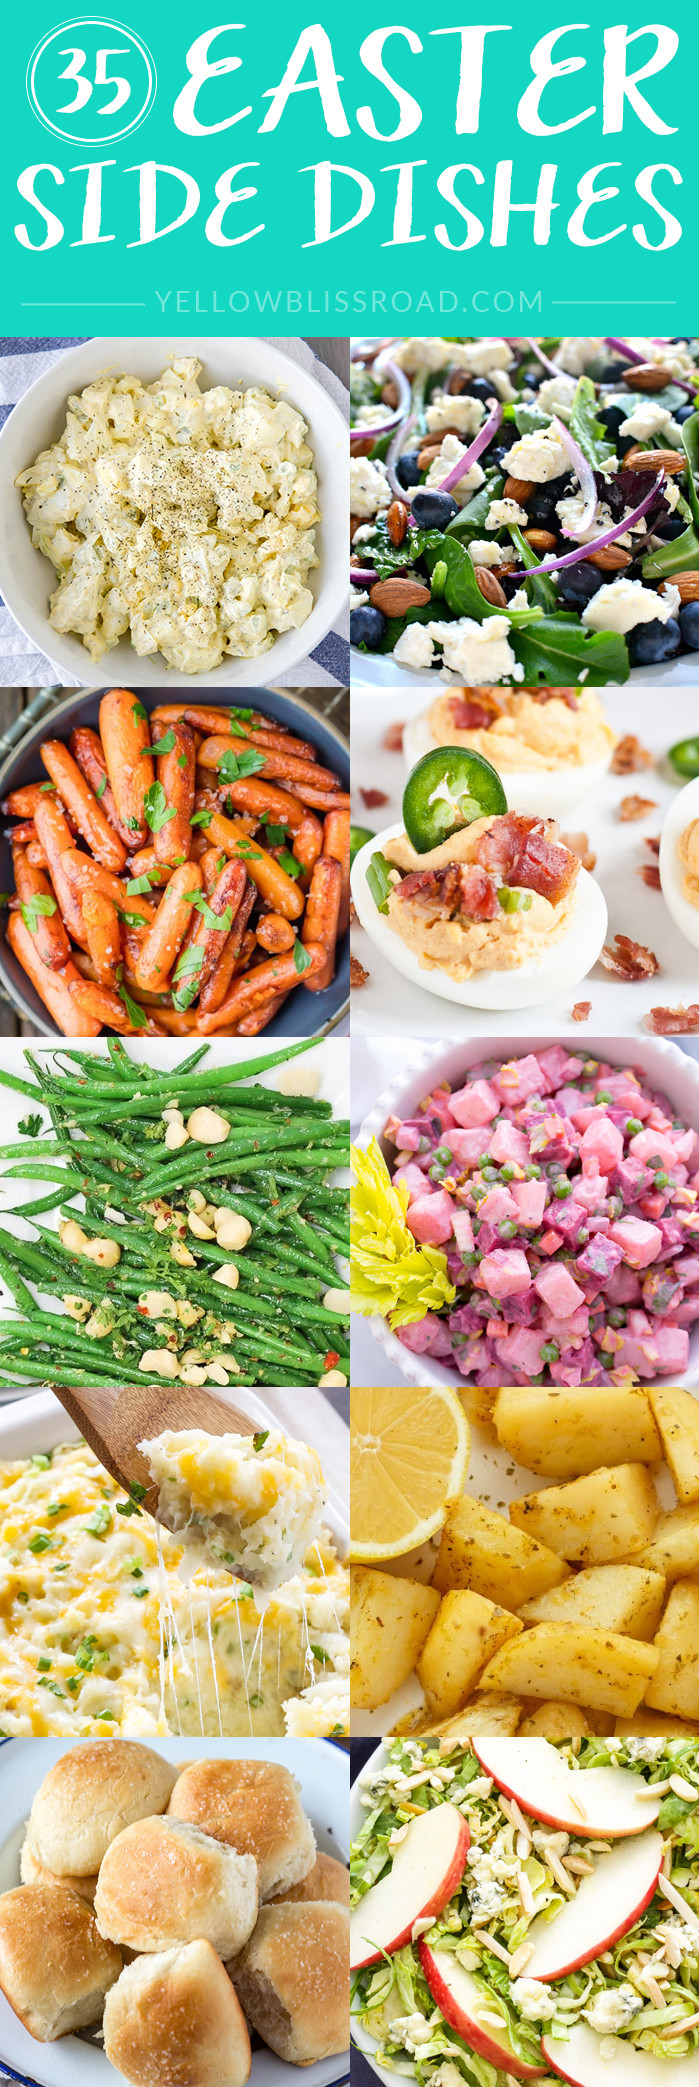 Easter Dinner Dishes
 Easter Side Dishes More than 50 of the Best Sides for